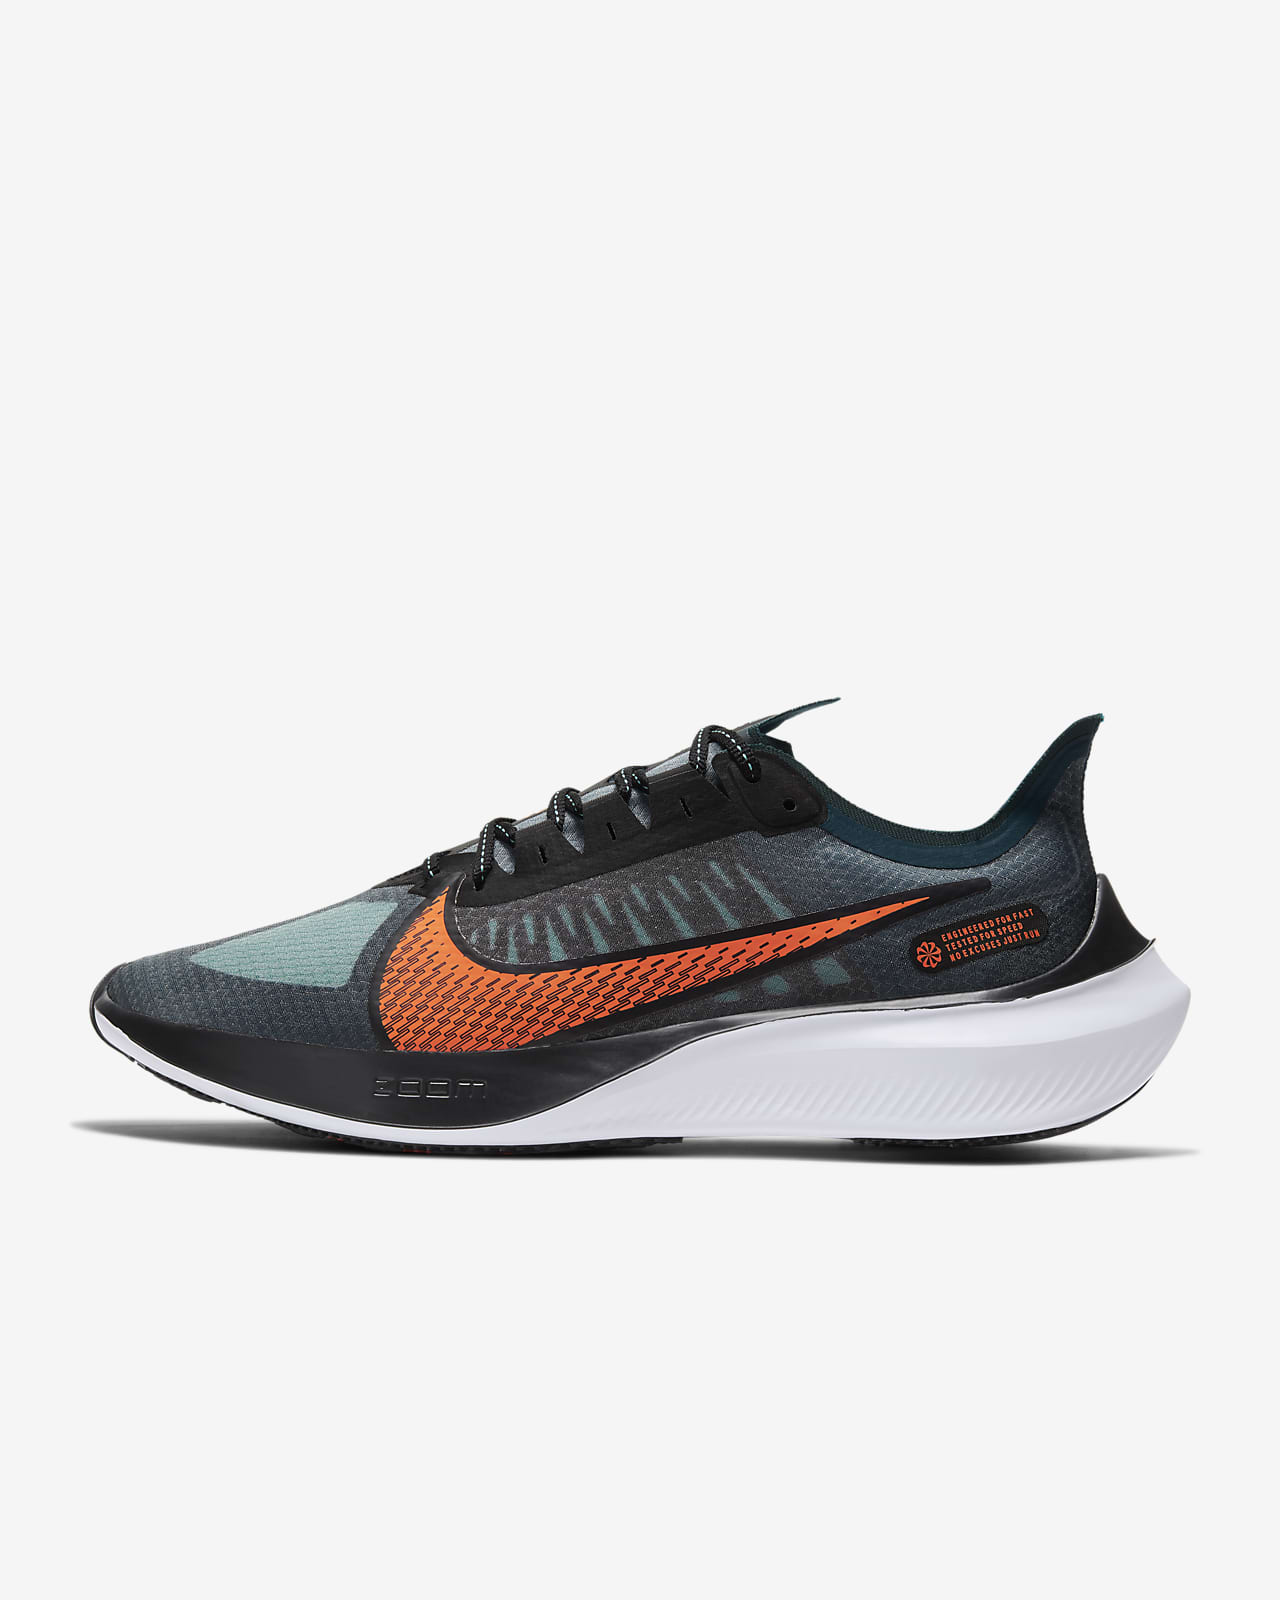 is nike zoom gravity good for running